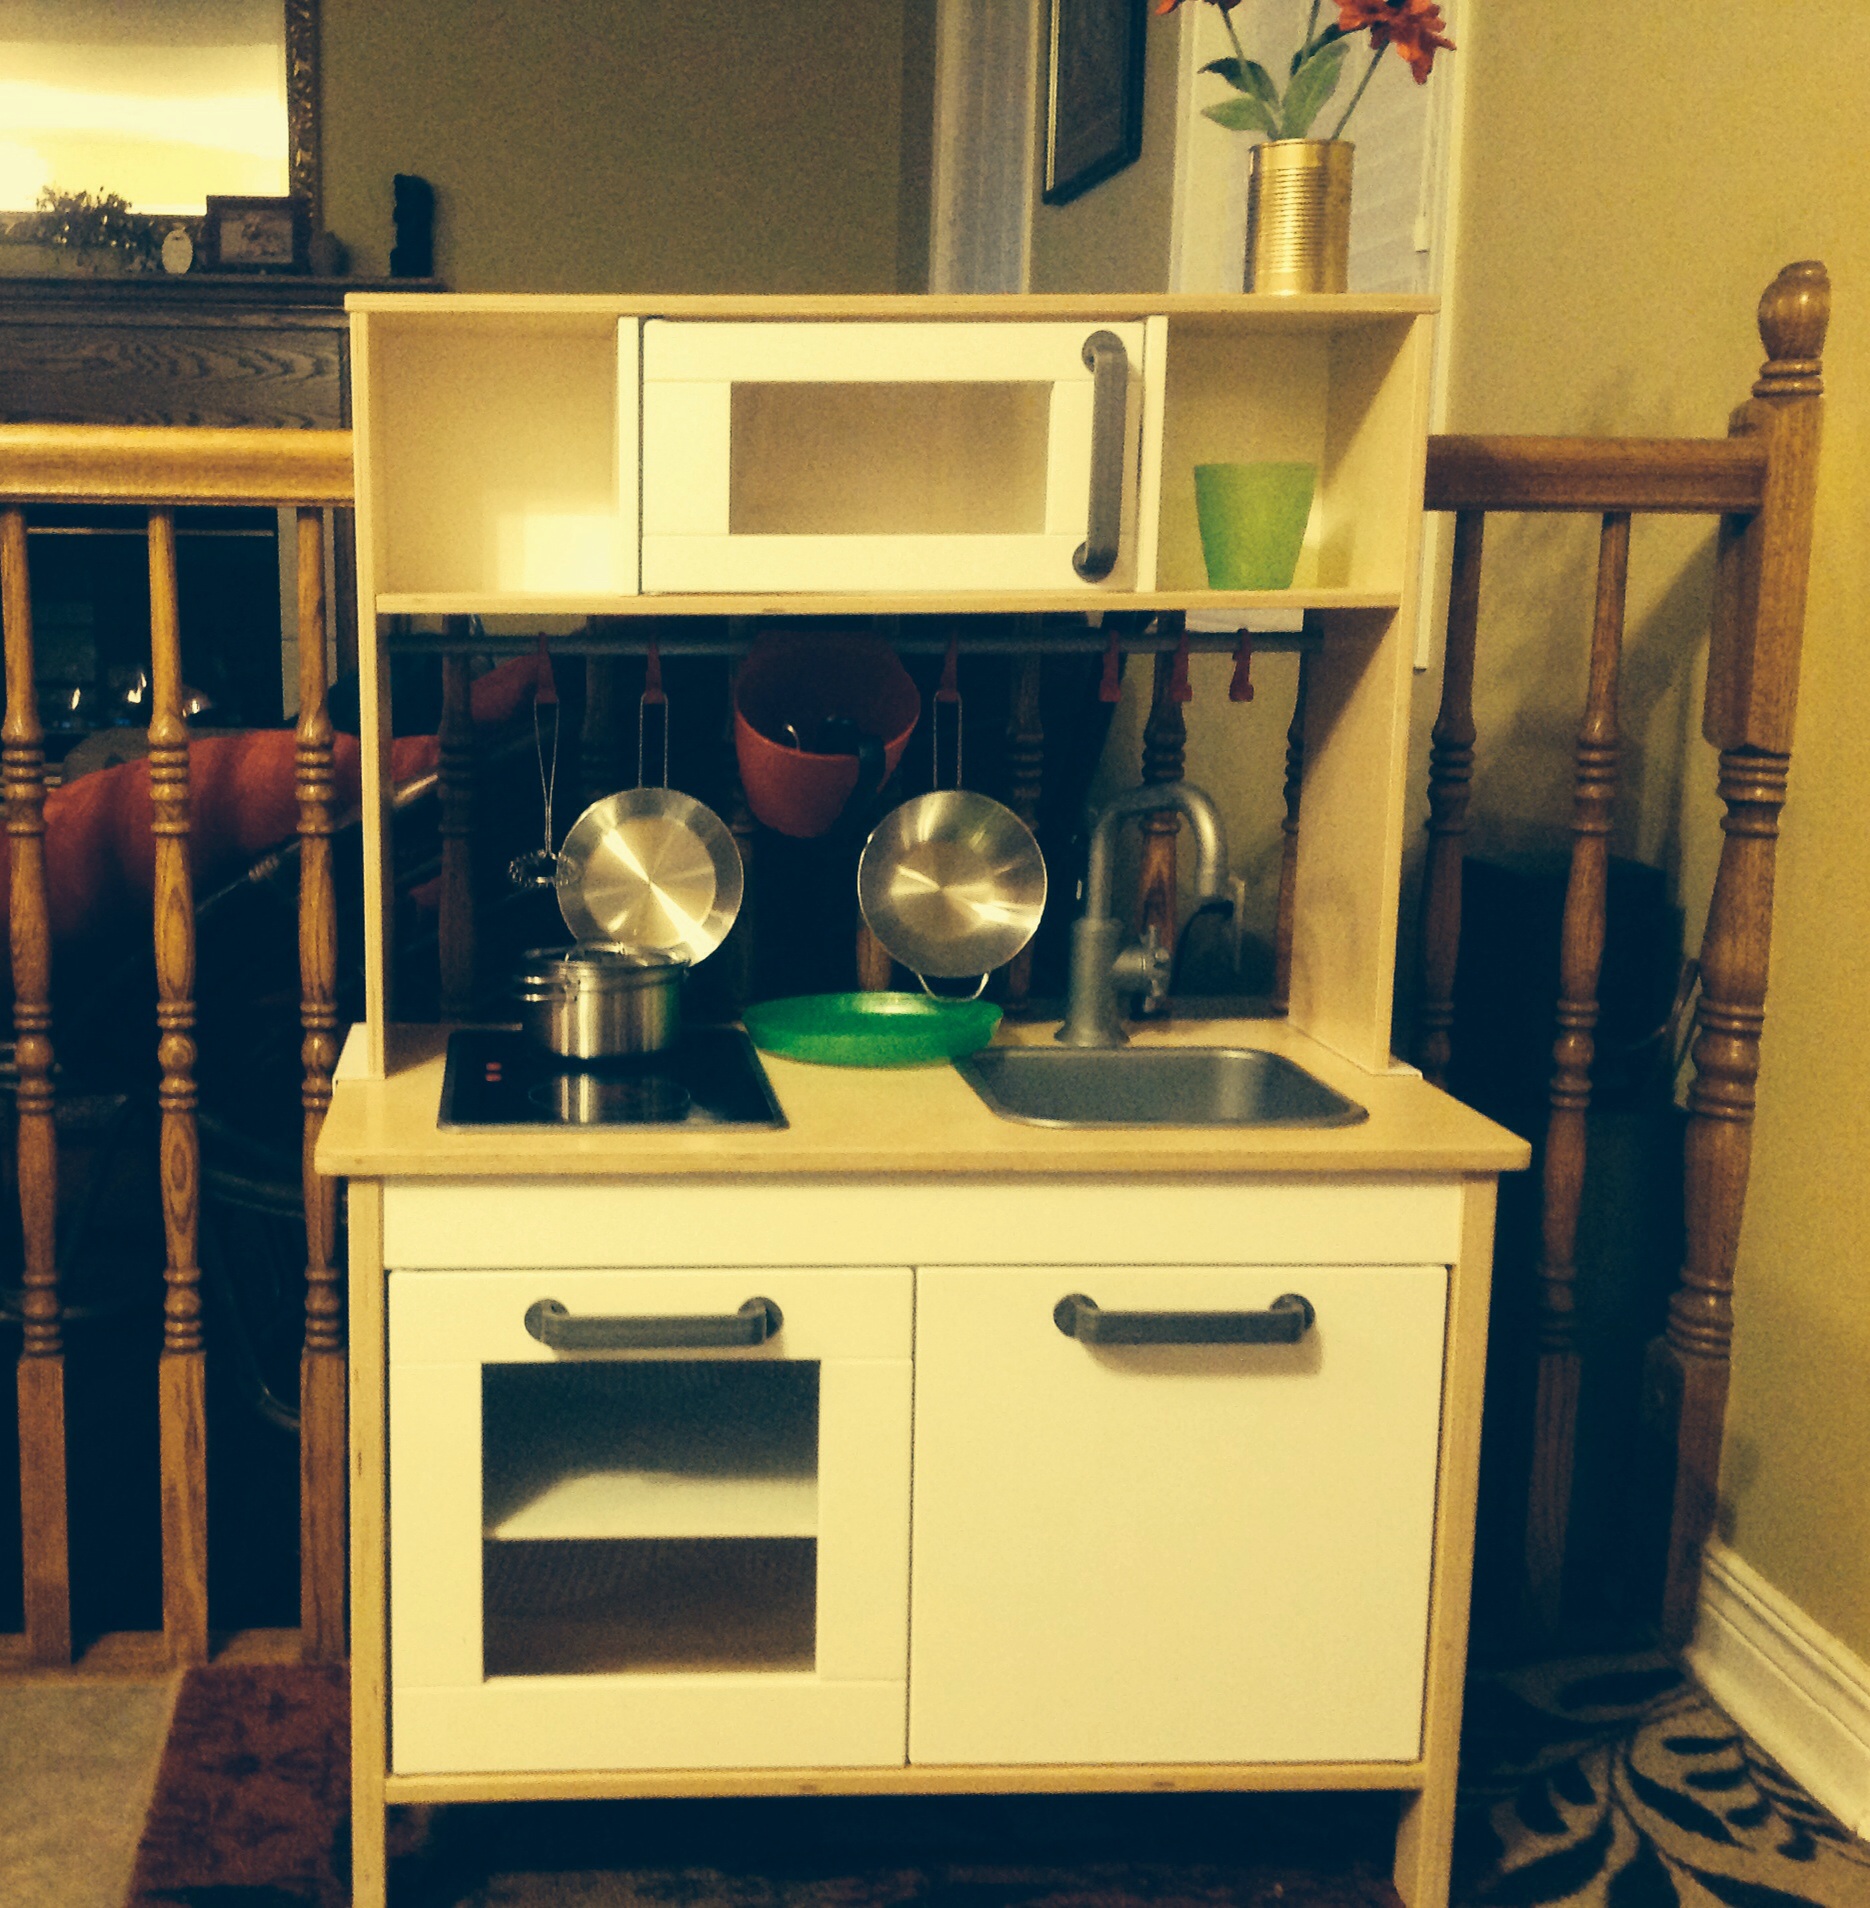 Ikea Duktig Mini Play Kitchen Review | youngmum2one